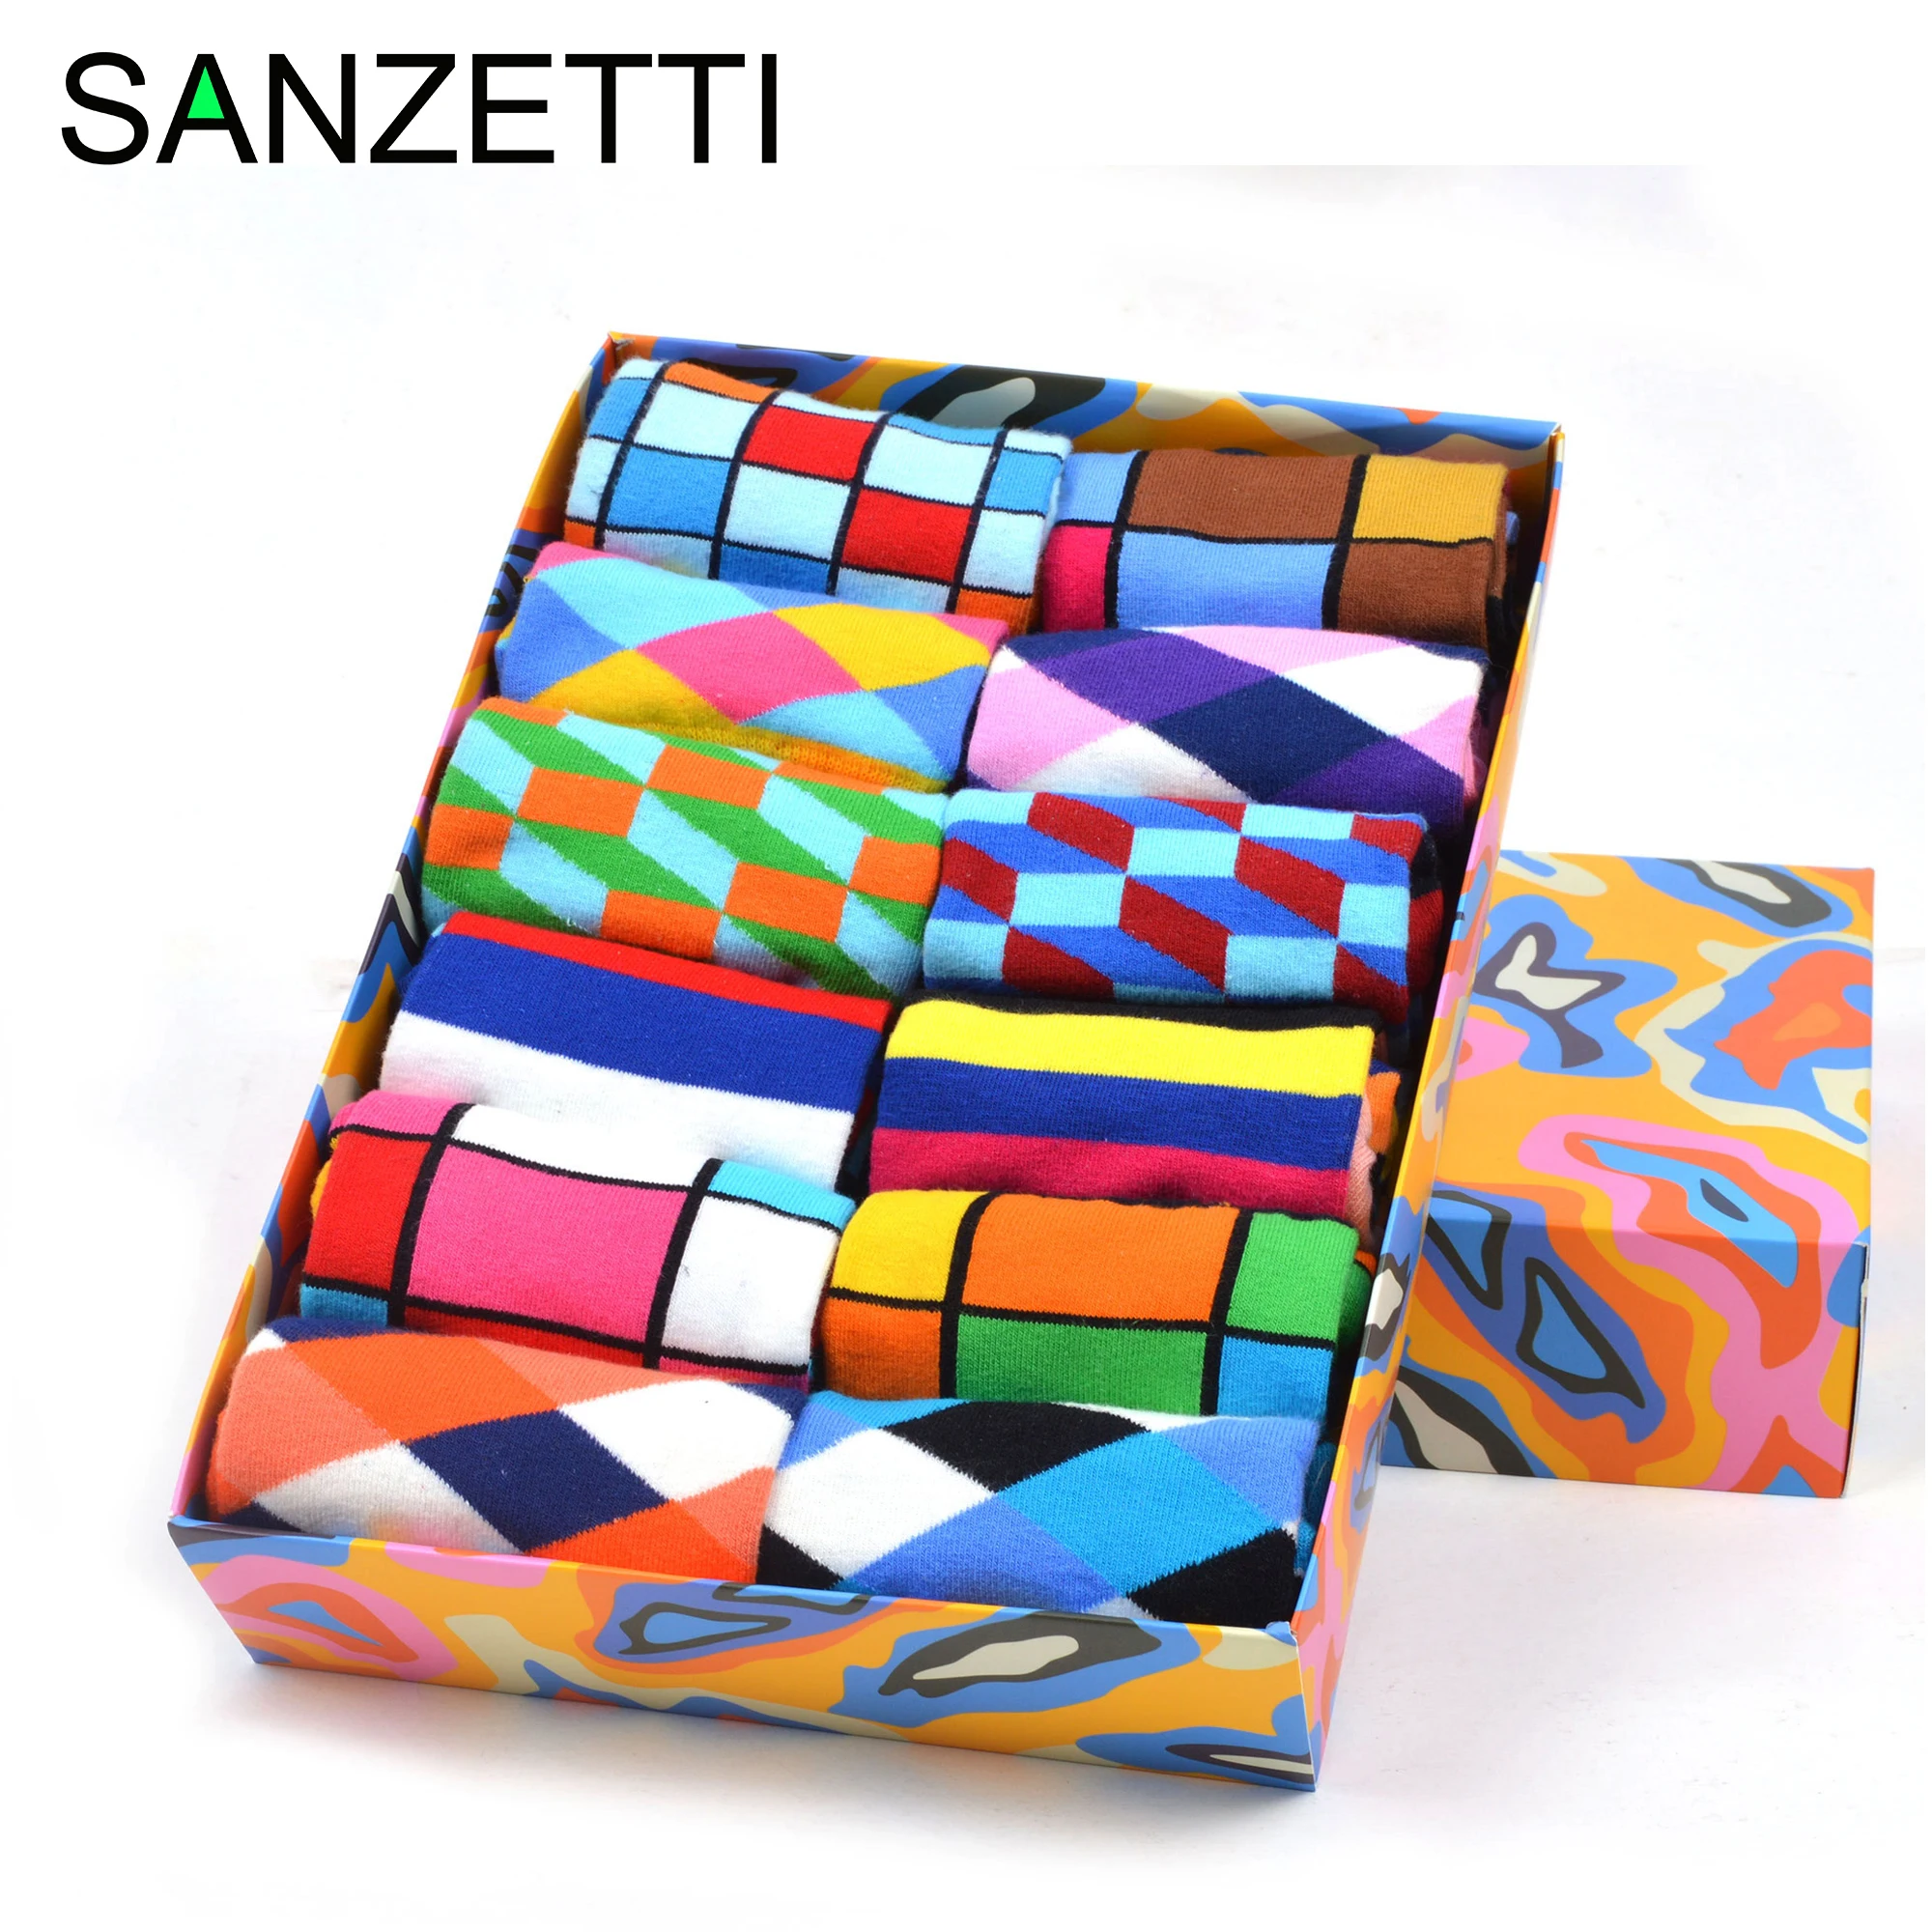 

SANZETTI 12 Pairs/Lot 2020 Hot Sale Colorful Men's casual combed Cotton Dress Socks High Quality Funny Happy Wedding Gift Box